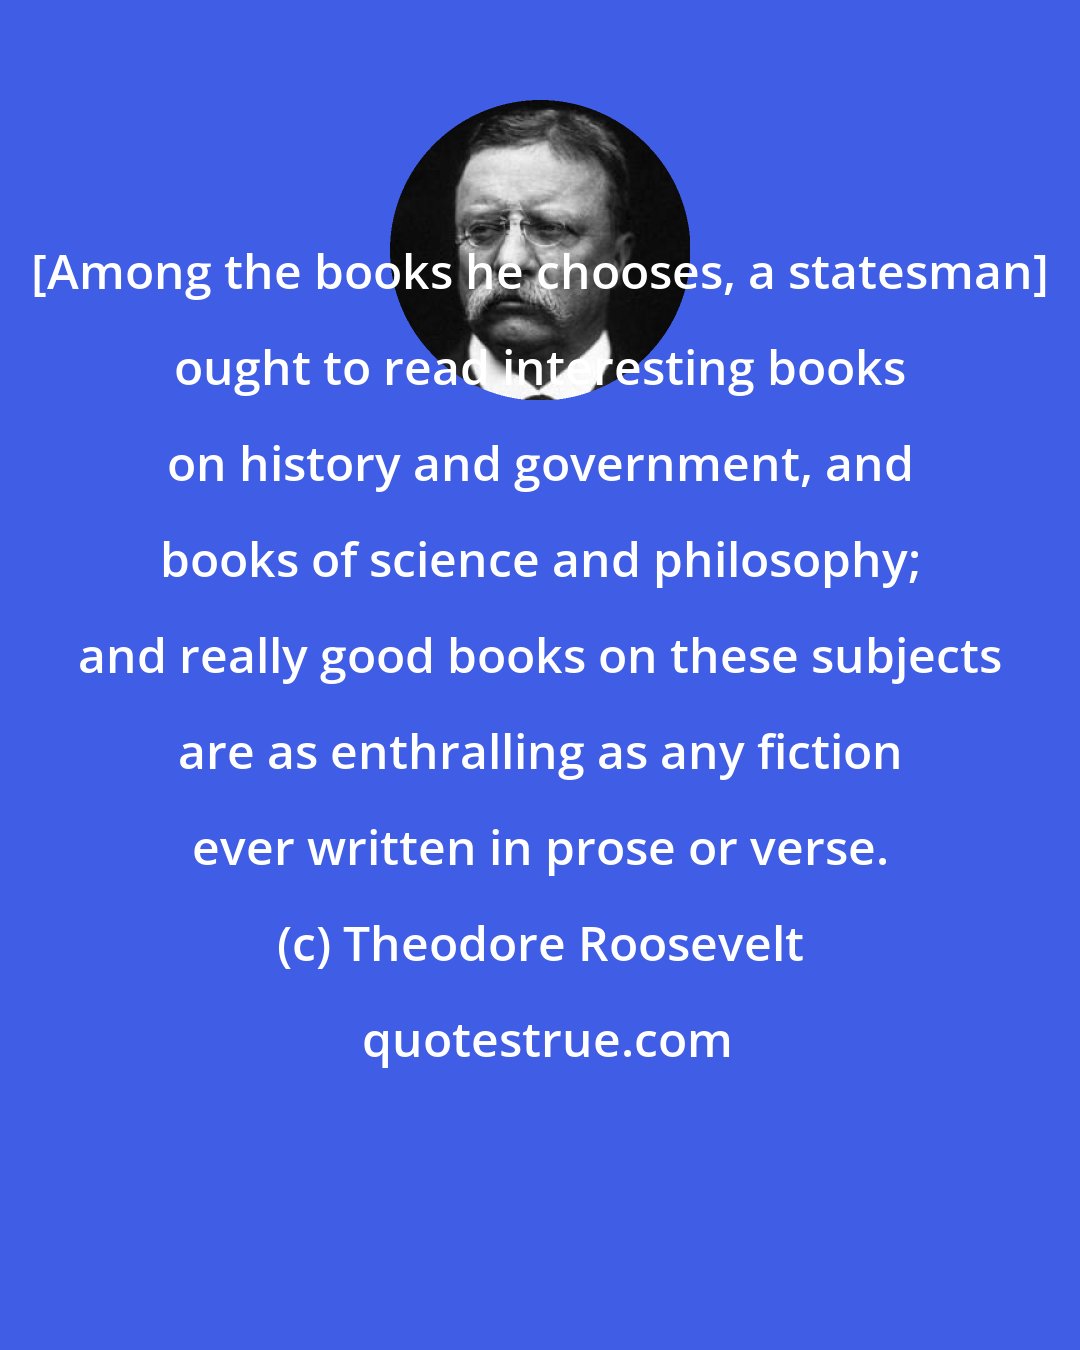 Theodore Roosevelt: [Among the books he chooses, a statesman] ought to read interesting books on history and government, and books of science and philosophy; and really good books on these subjects are as enthralling as any fiction ever written in prose or verse.